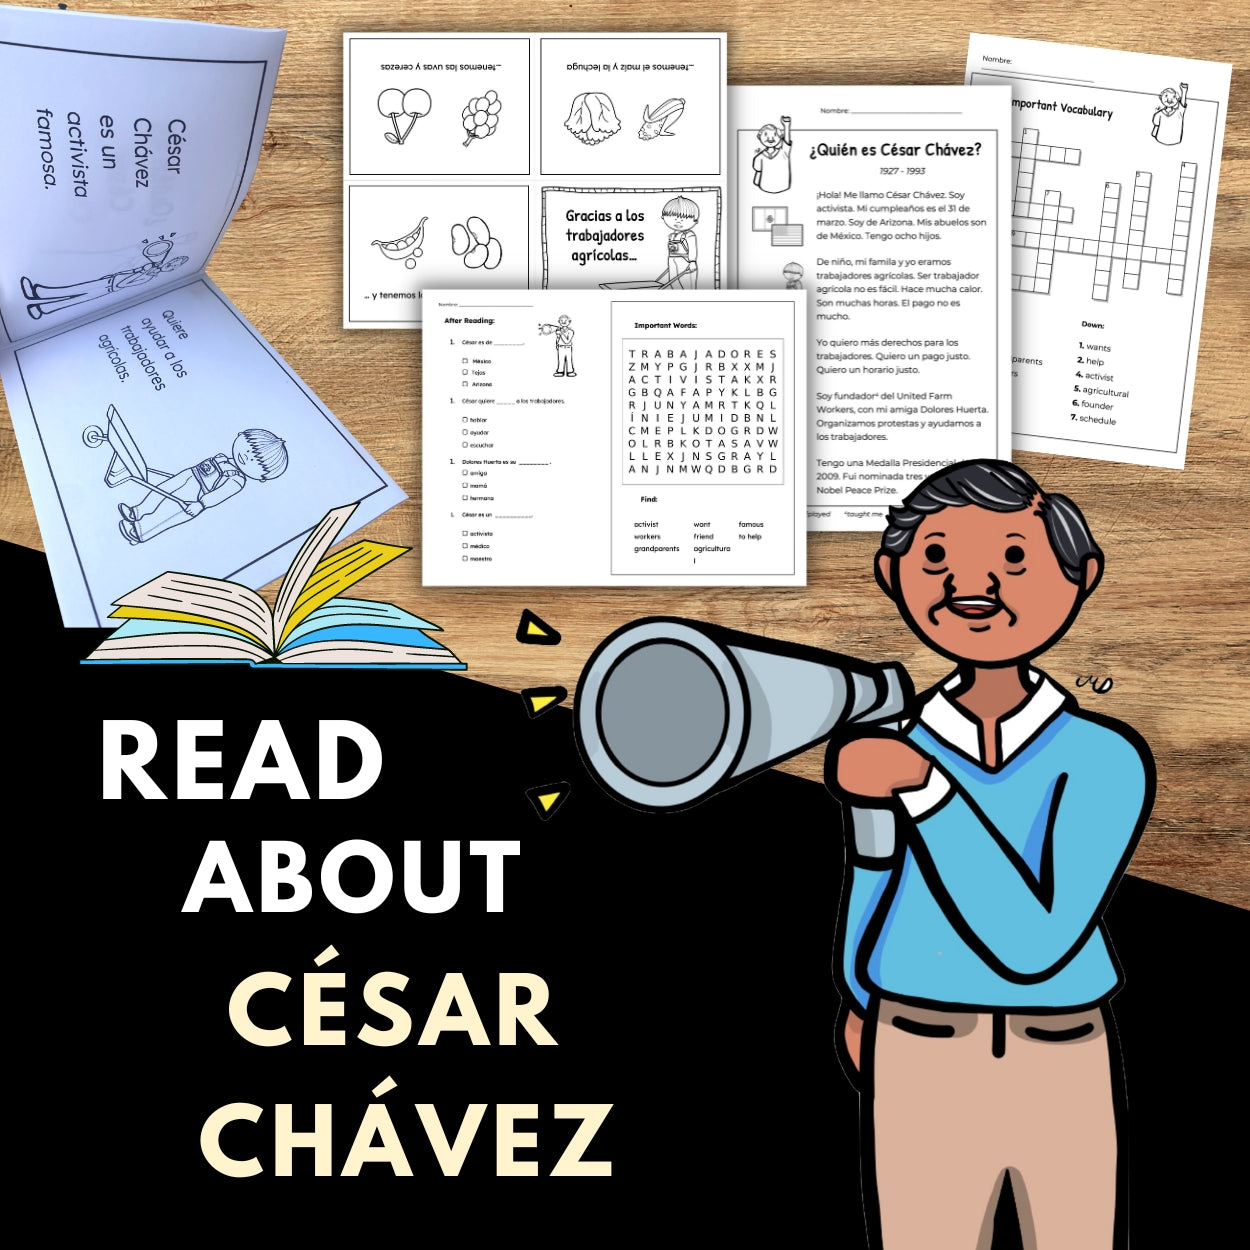 César Chávez Mini-Book, Reading Texts, & Activities in Spanish and English